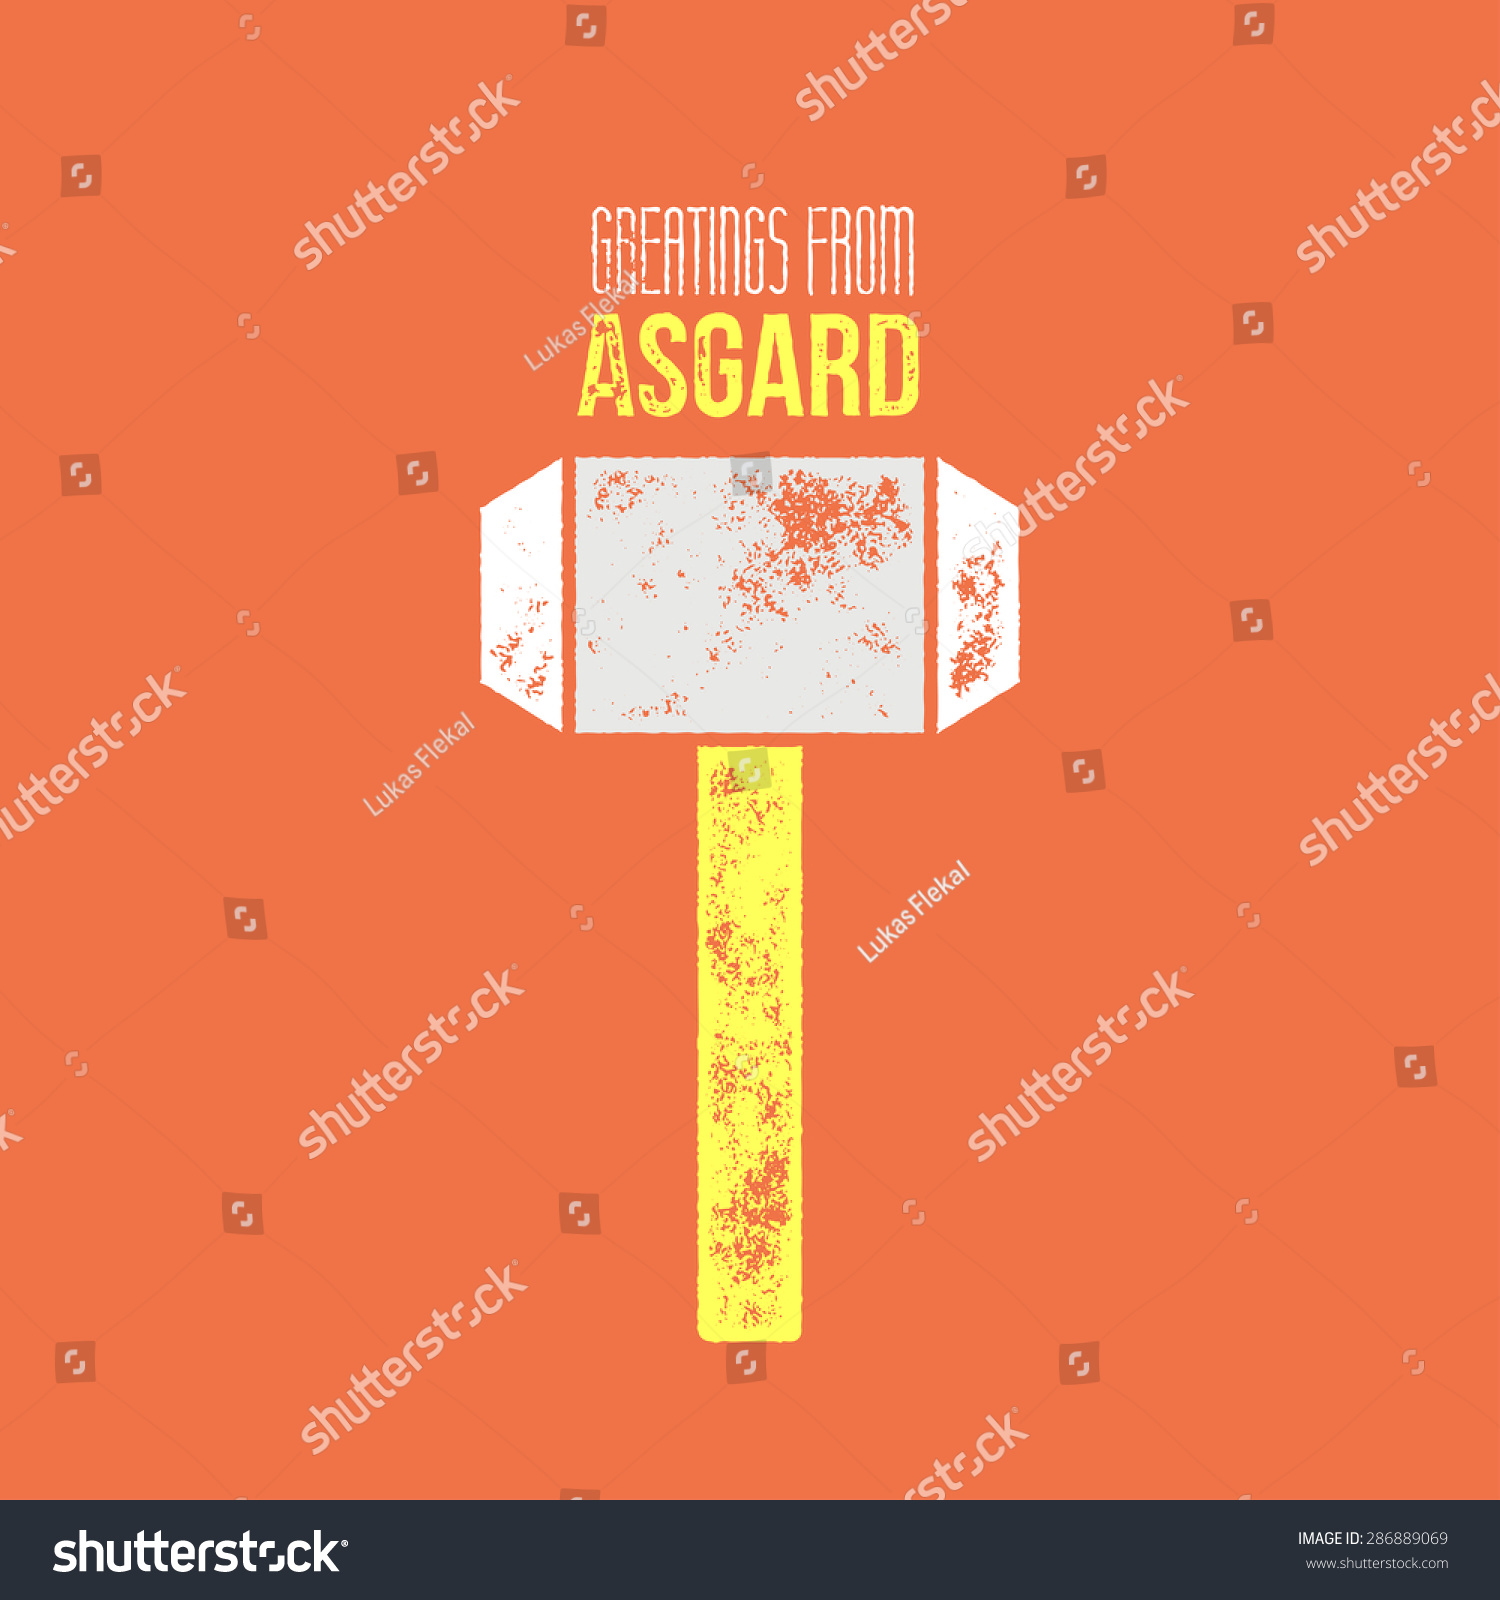 SVG of Thors message t-shirt or logo comic design - vector illustration - hammer on orange background with greetings from asgard sign svg